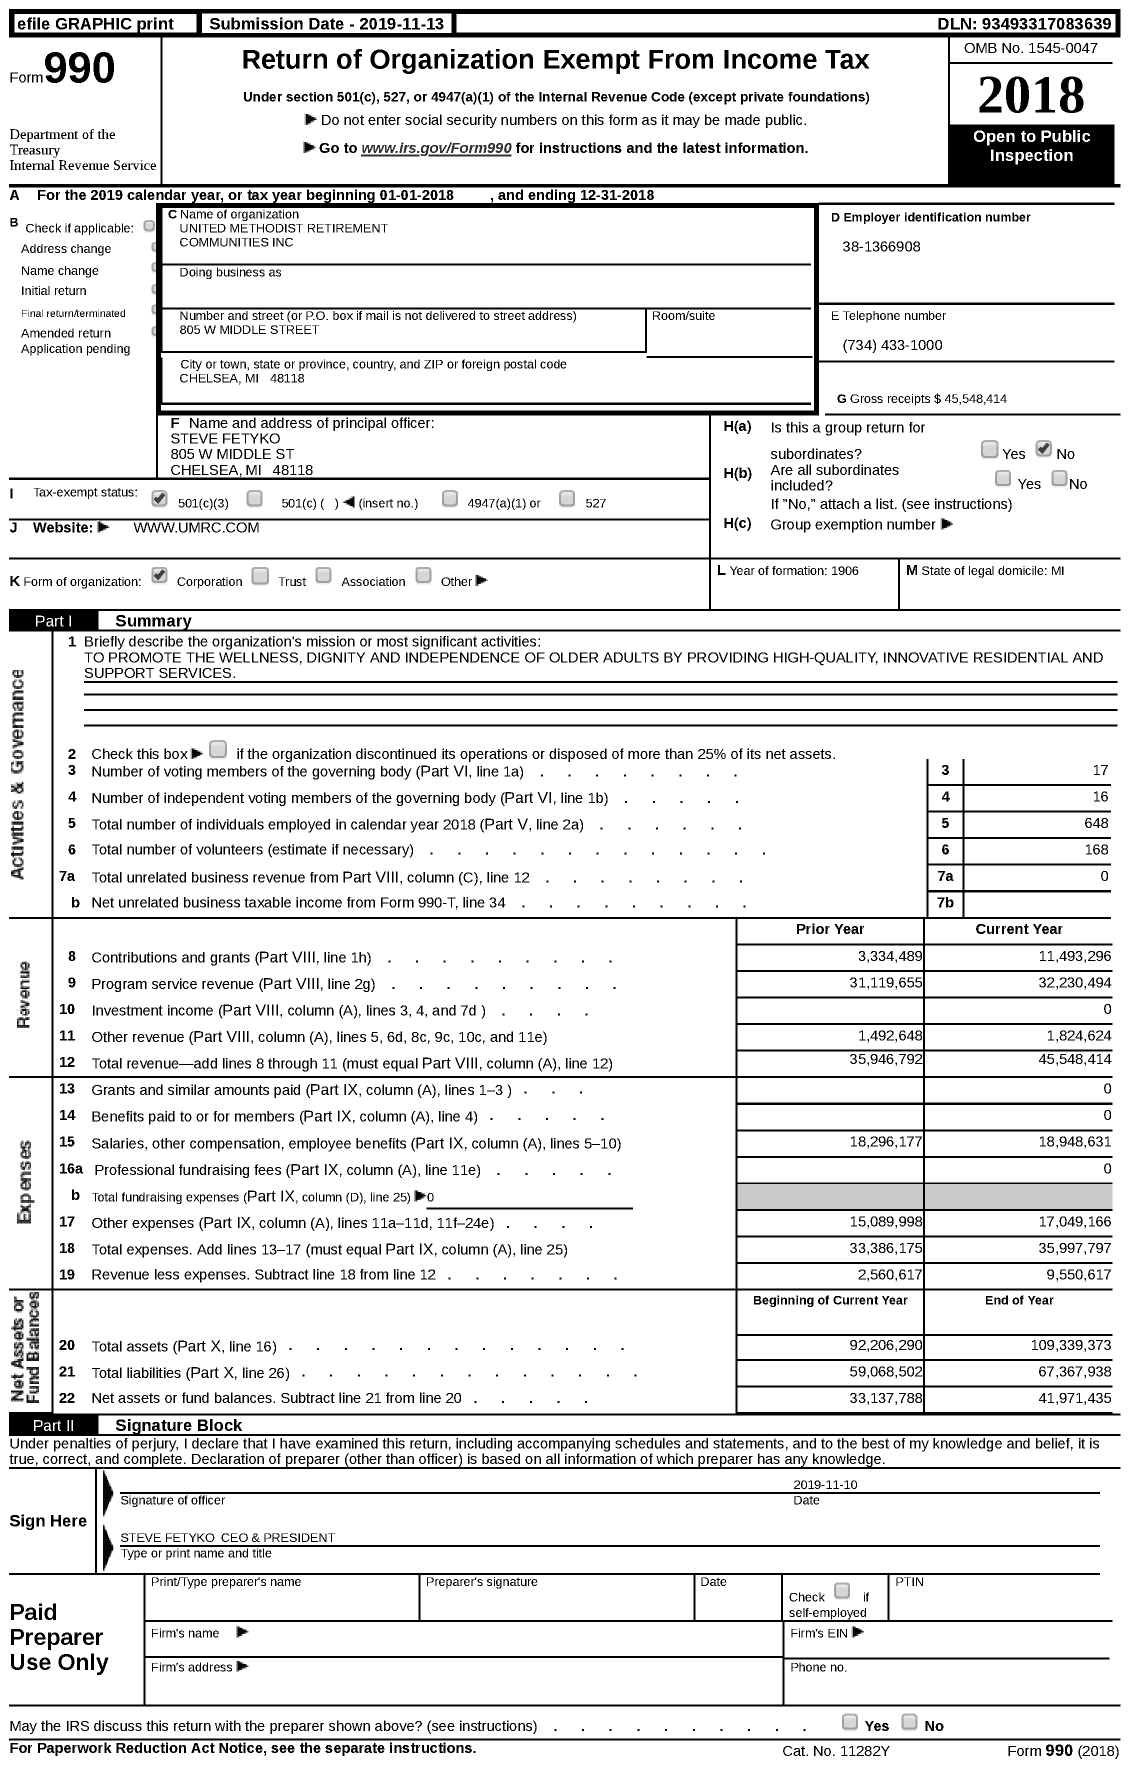 Image of first page of 2018 Form 990 for United Methodist Retirement Communities (UMRC)